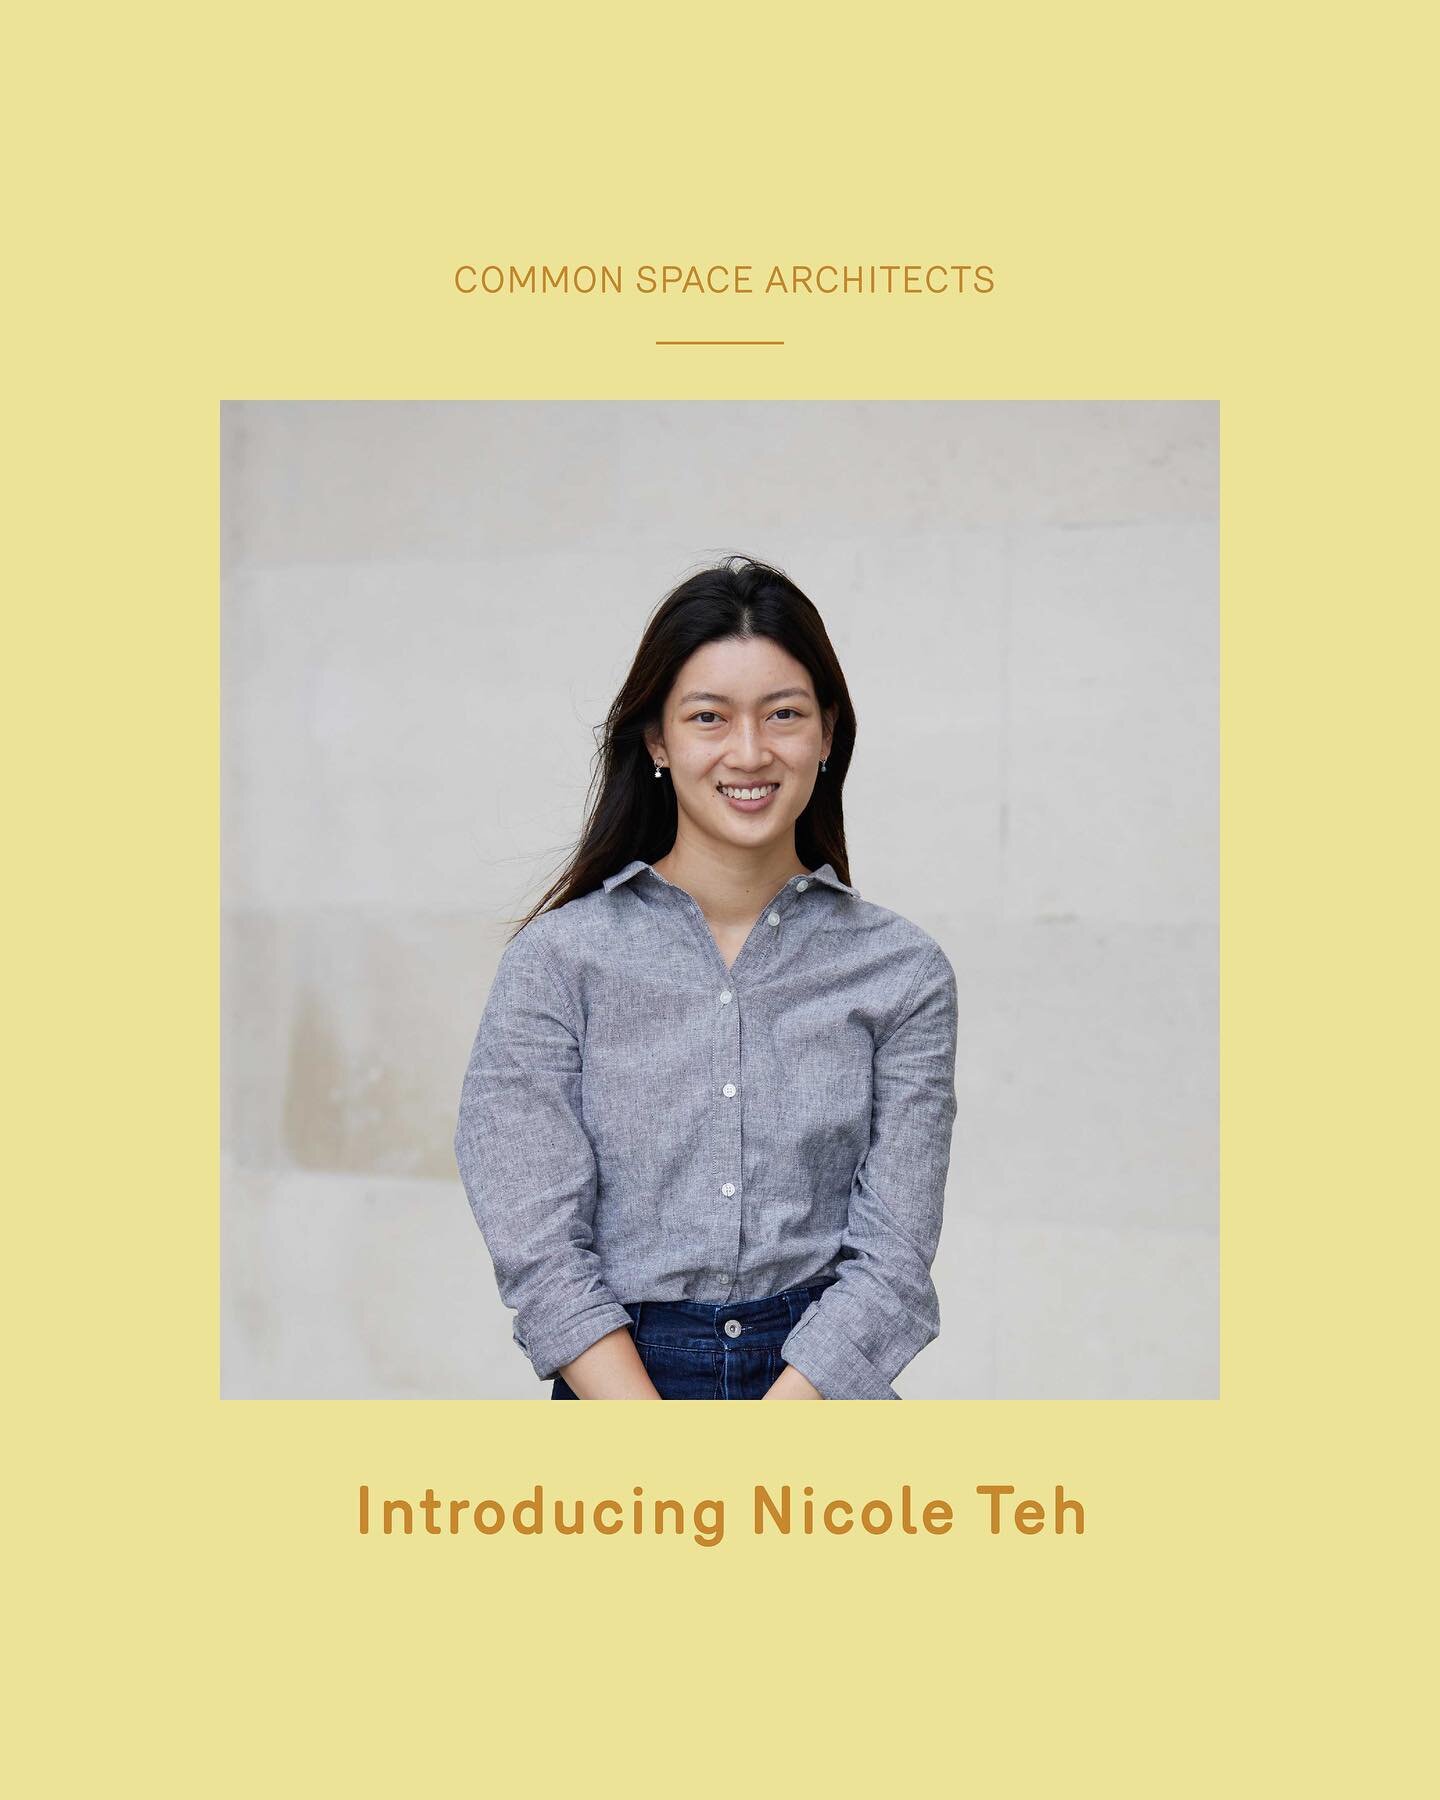 Introducing Nicole Teh.
Nicole is an architectural graduate at Common Space. She is passionate about architecture's potential to build upon the character, environment and culture of different communities. Working in an interdisciplinary and collabora